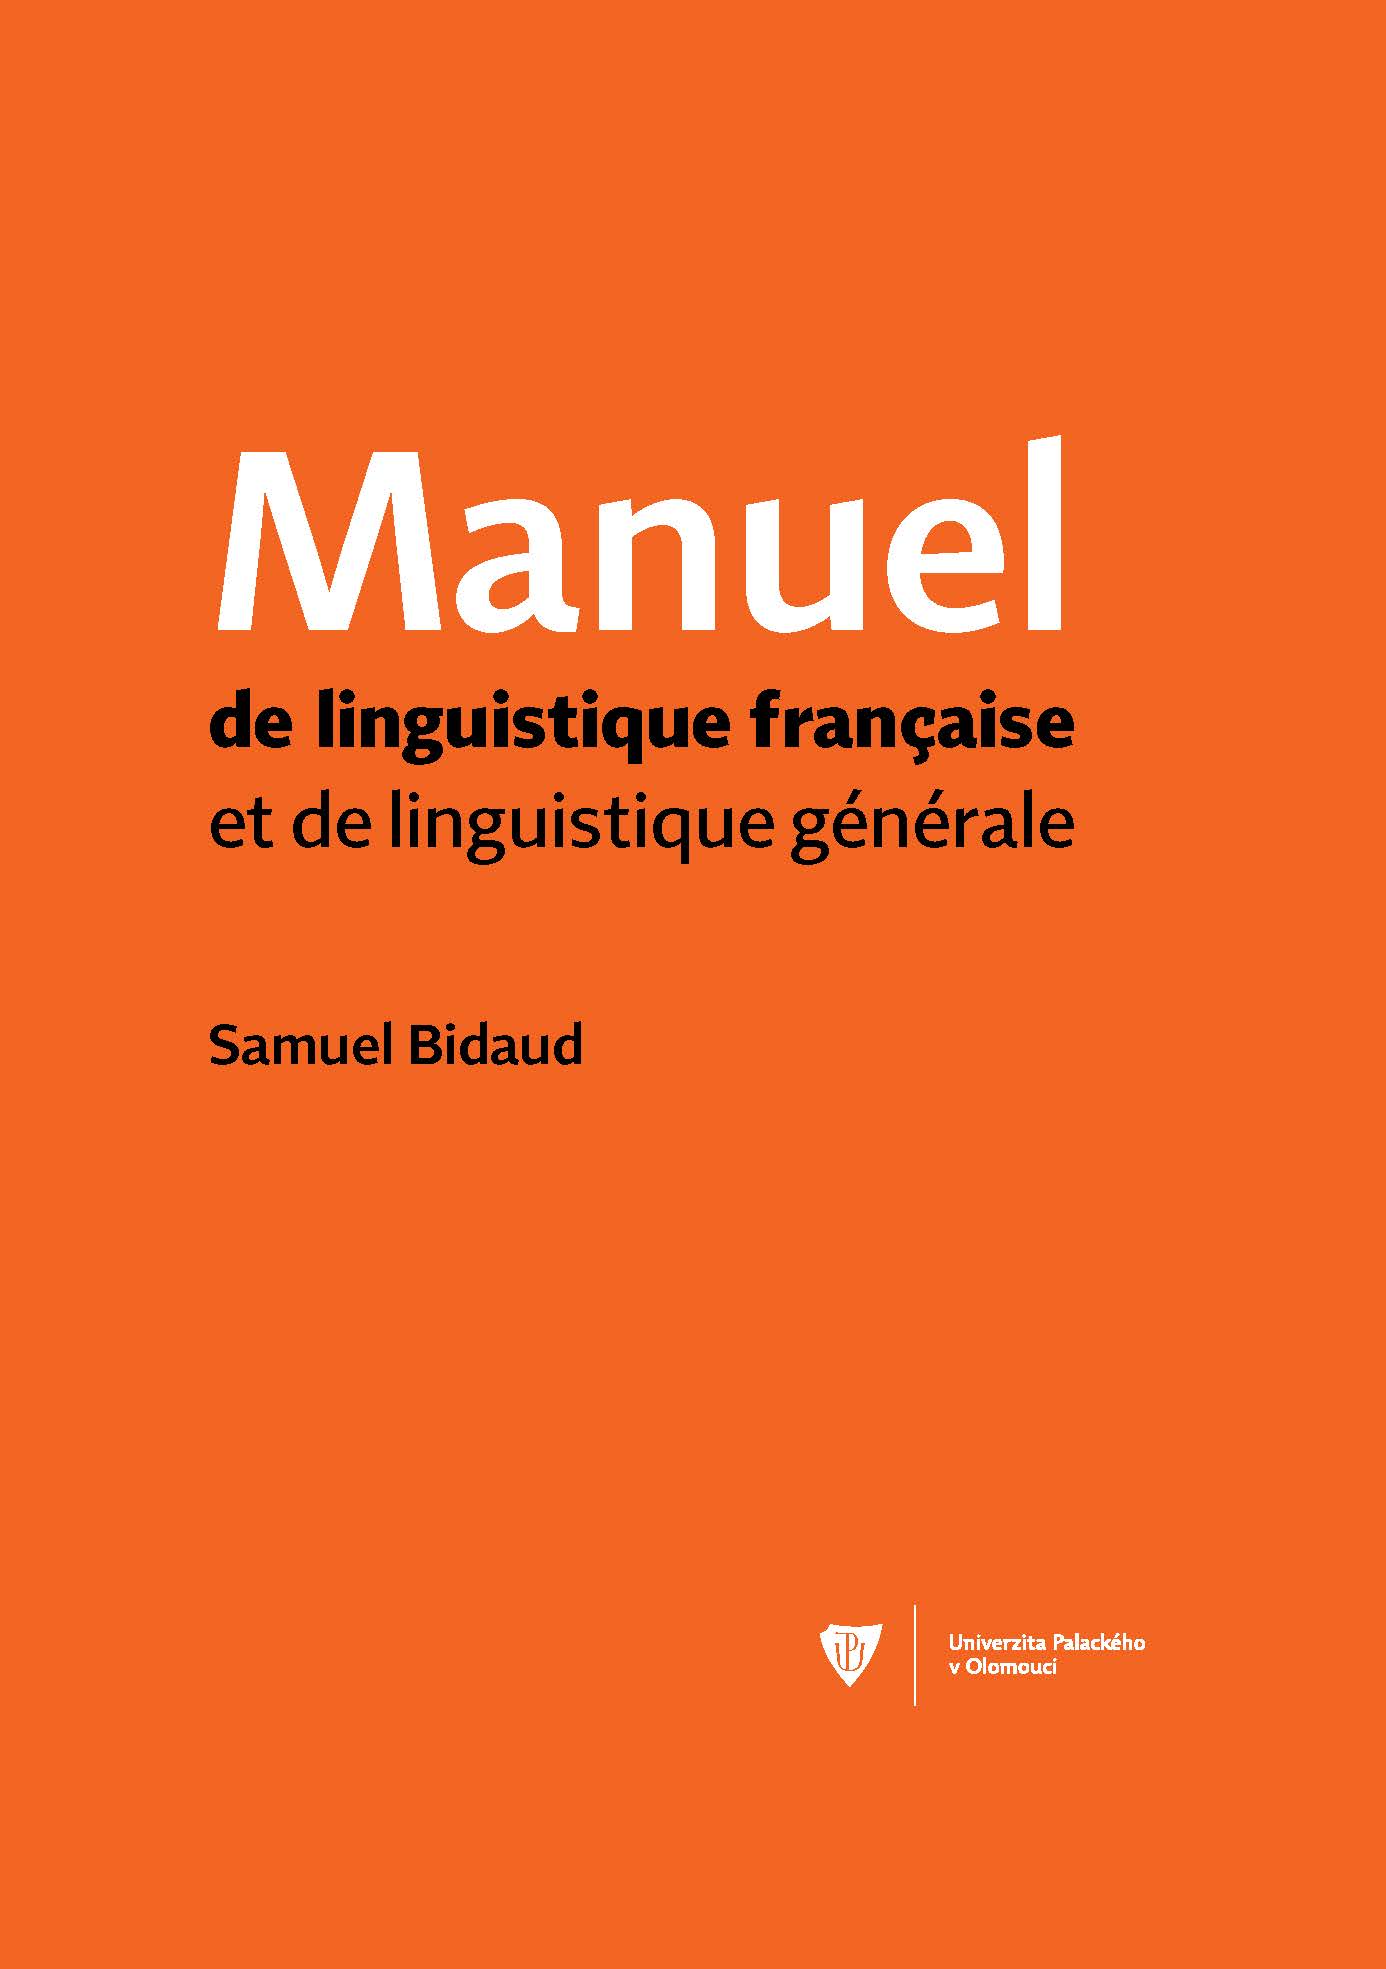 Manual of French linguistics and general linguistics